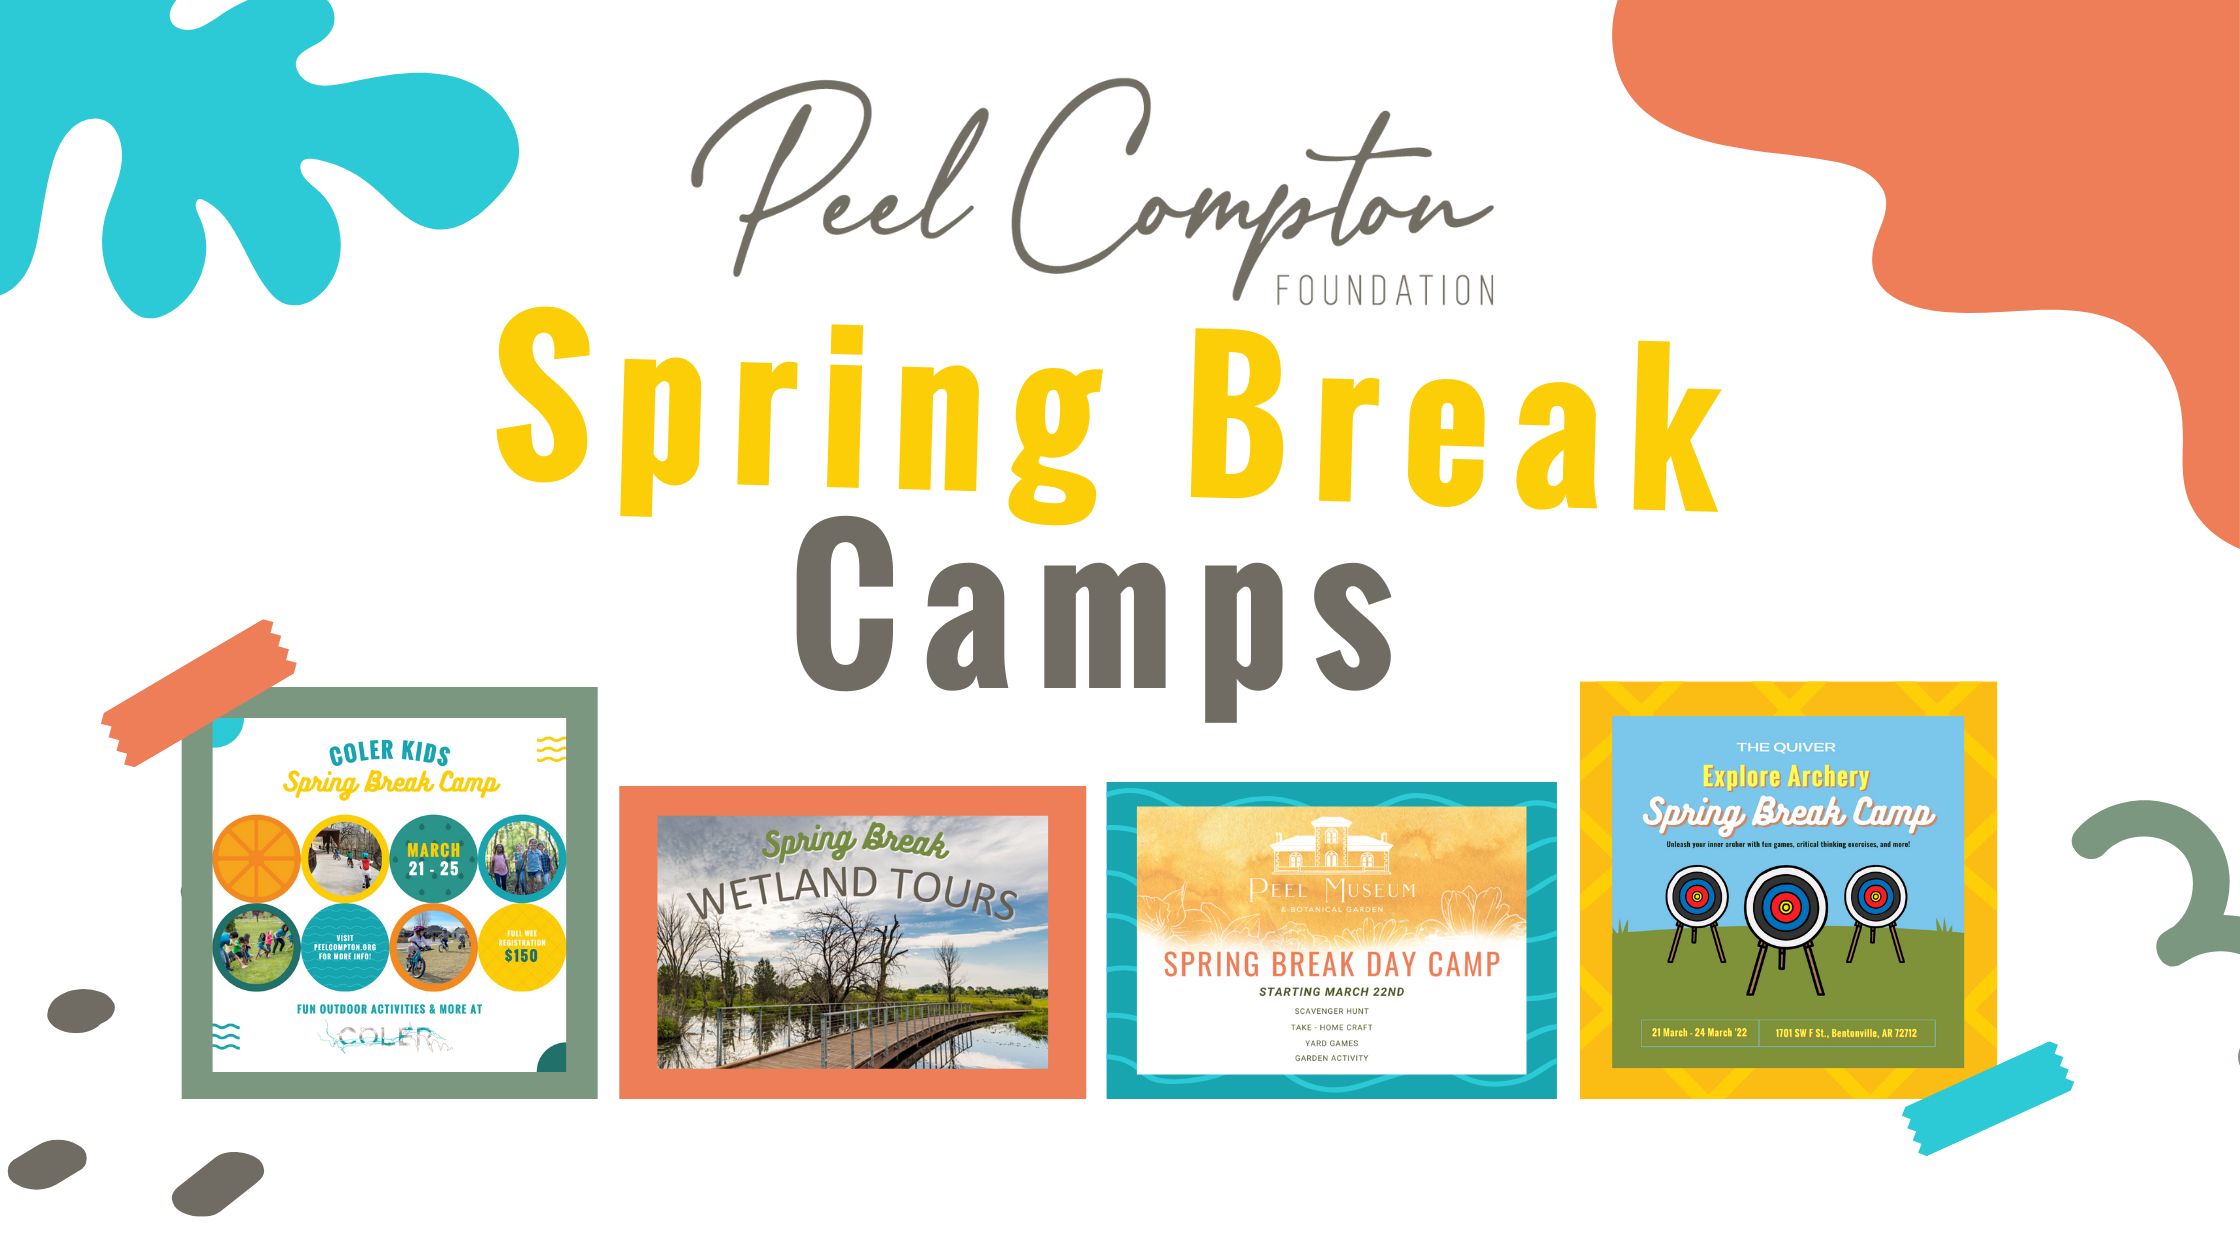 4 Spring Break Camp graphics on a white background under the heading "Peel Compton Foundation Spring Break Camps" in yellow.